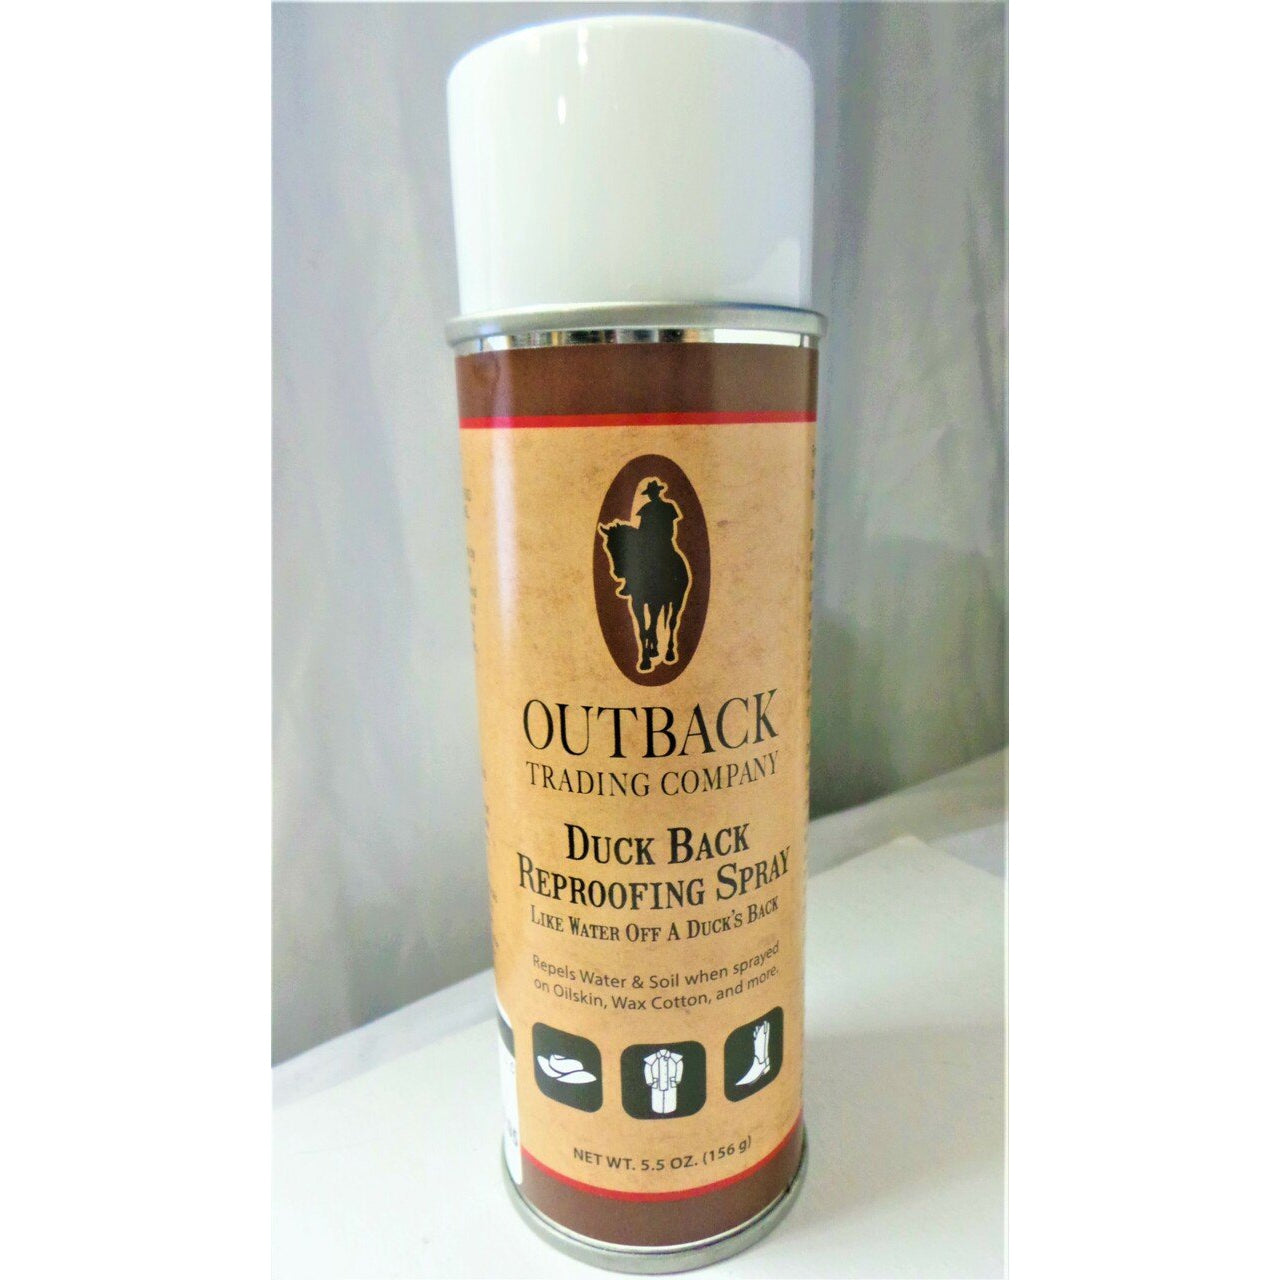 Outback Duck Back Reproofing Spray